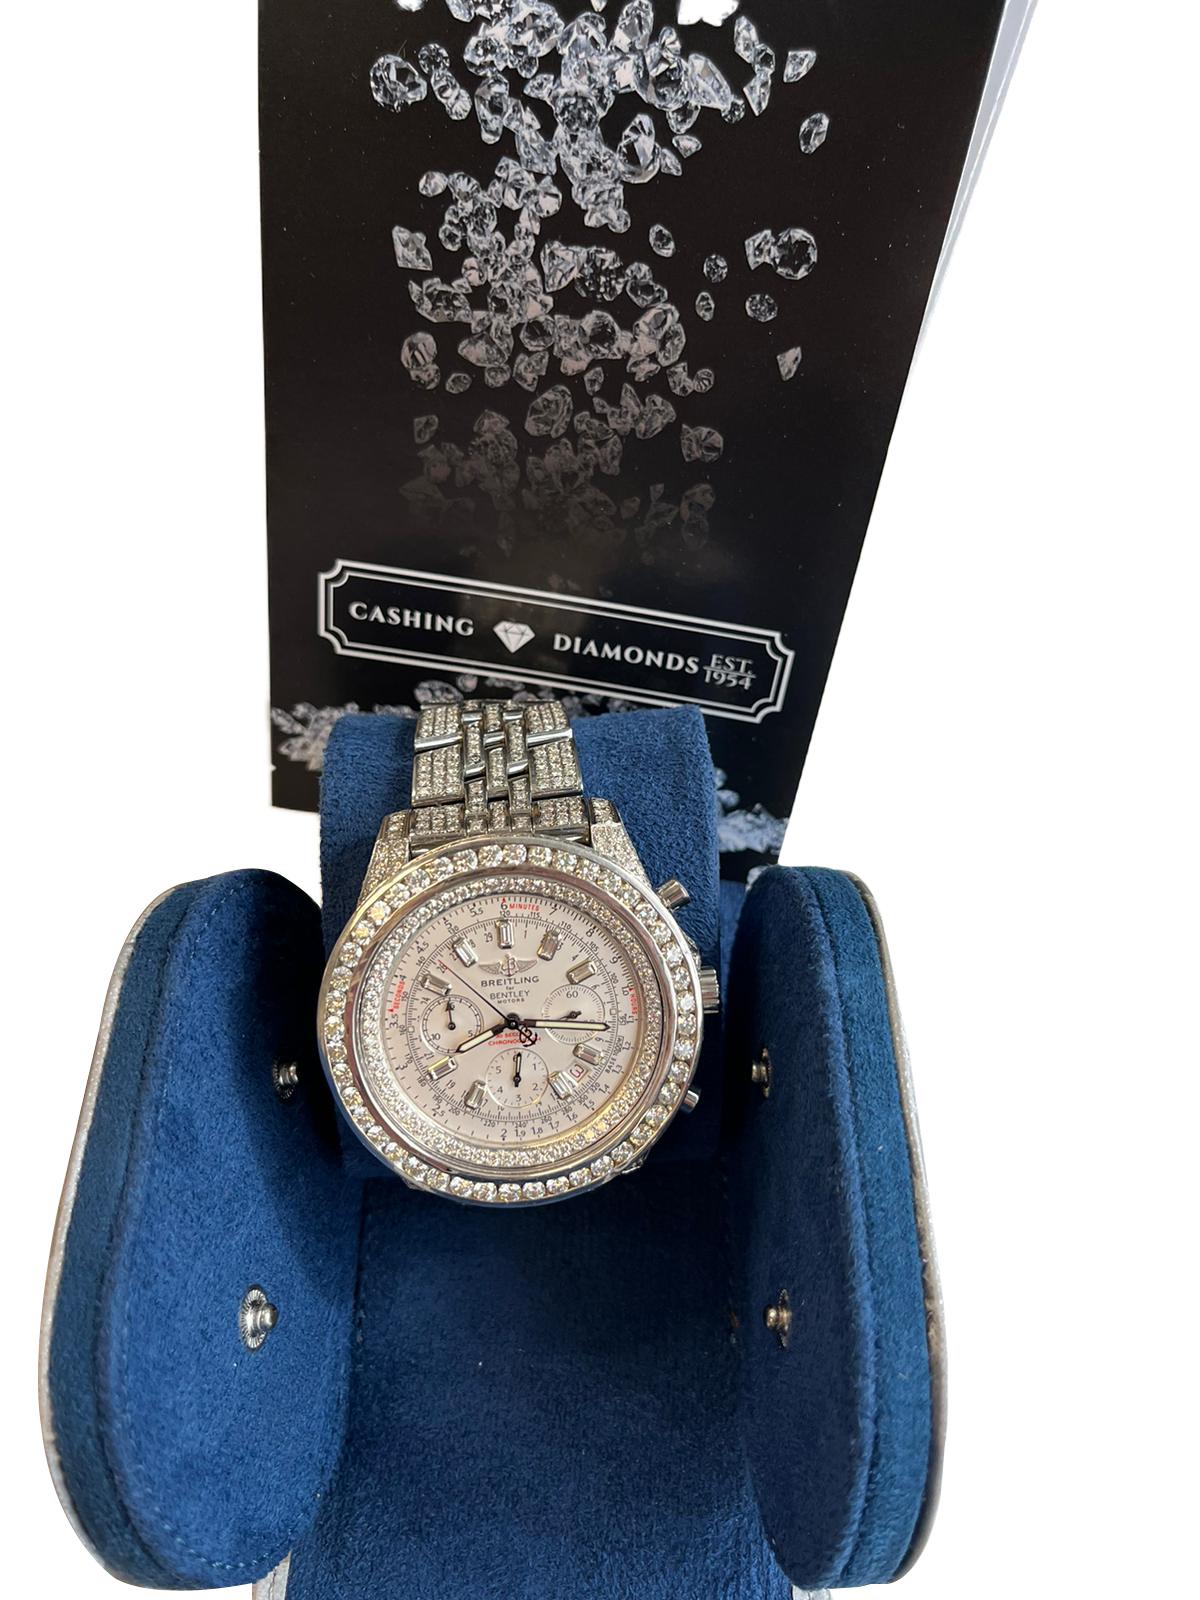 Iced Out Breitling Bentley A4436412 Custom Diamond Watch, An exquisite geometric design. Some of its characteristics include a multi-link bracelet secured by a folding clasp, a stunning rectangular case flanked by sleek chronograph pushers, recessed